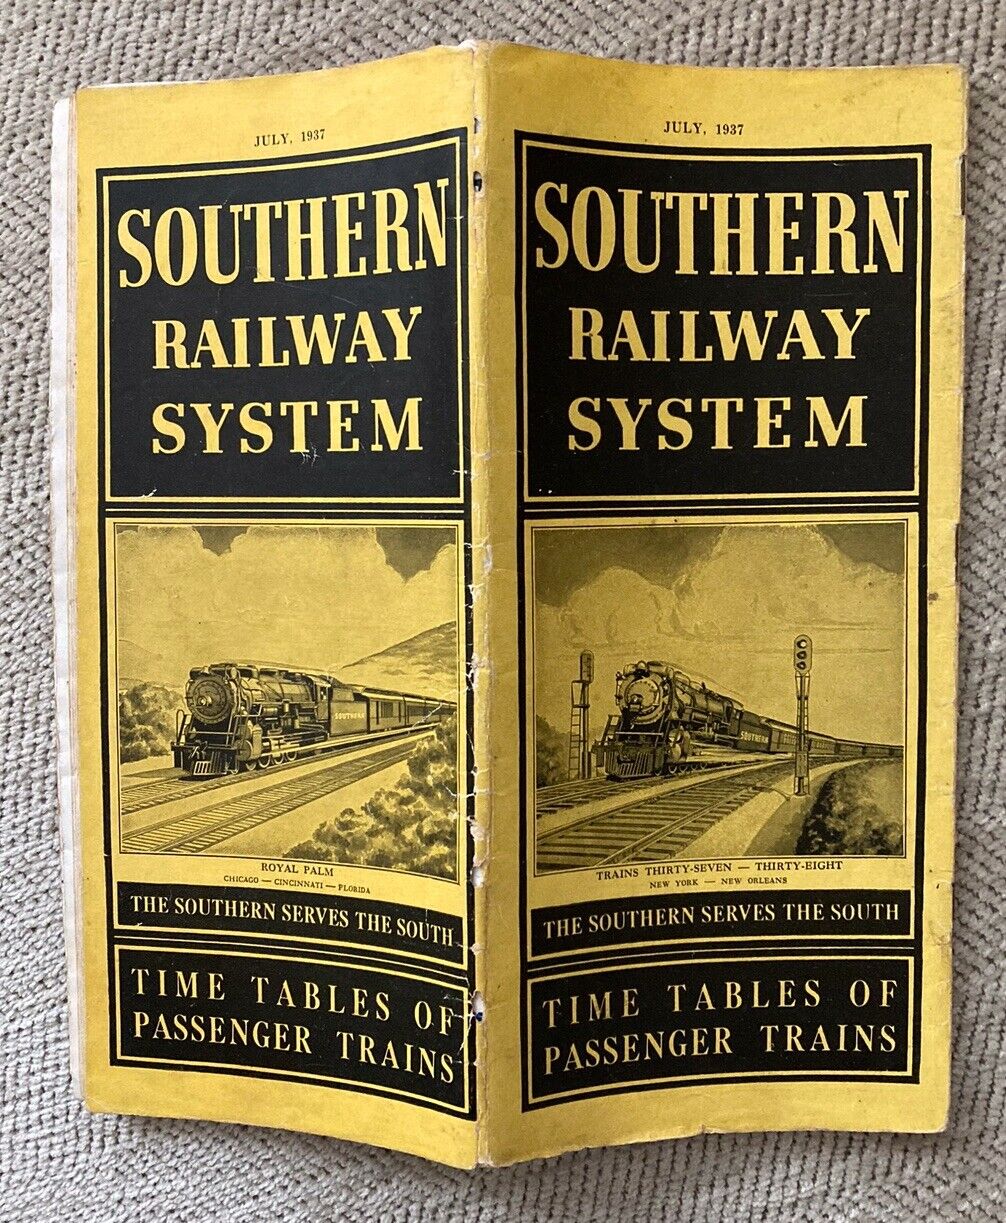 Southern Railway July 1937 Public Timetable-many great name train ads